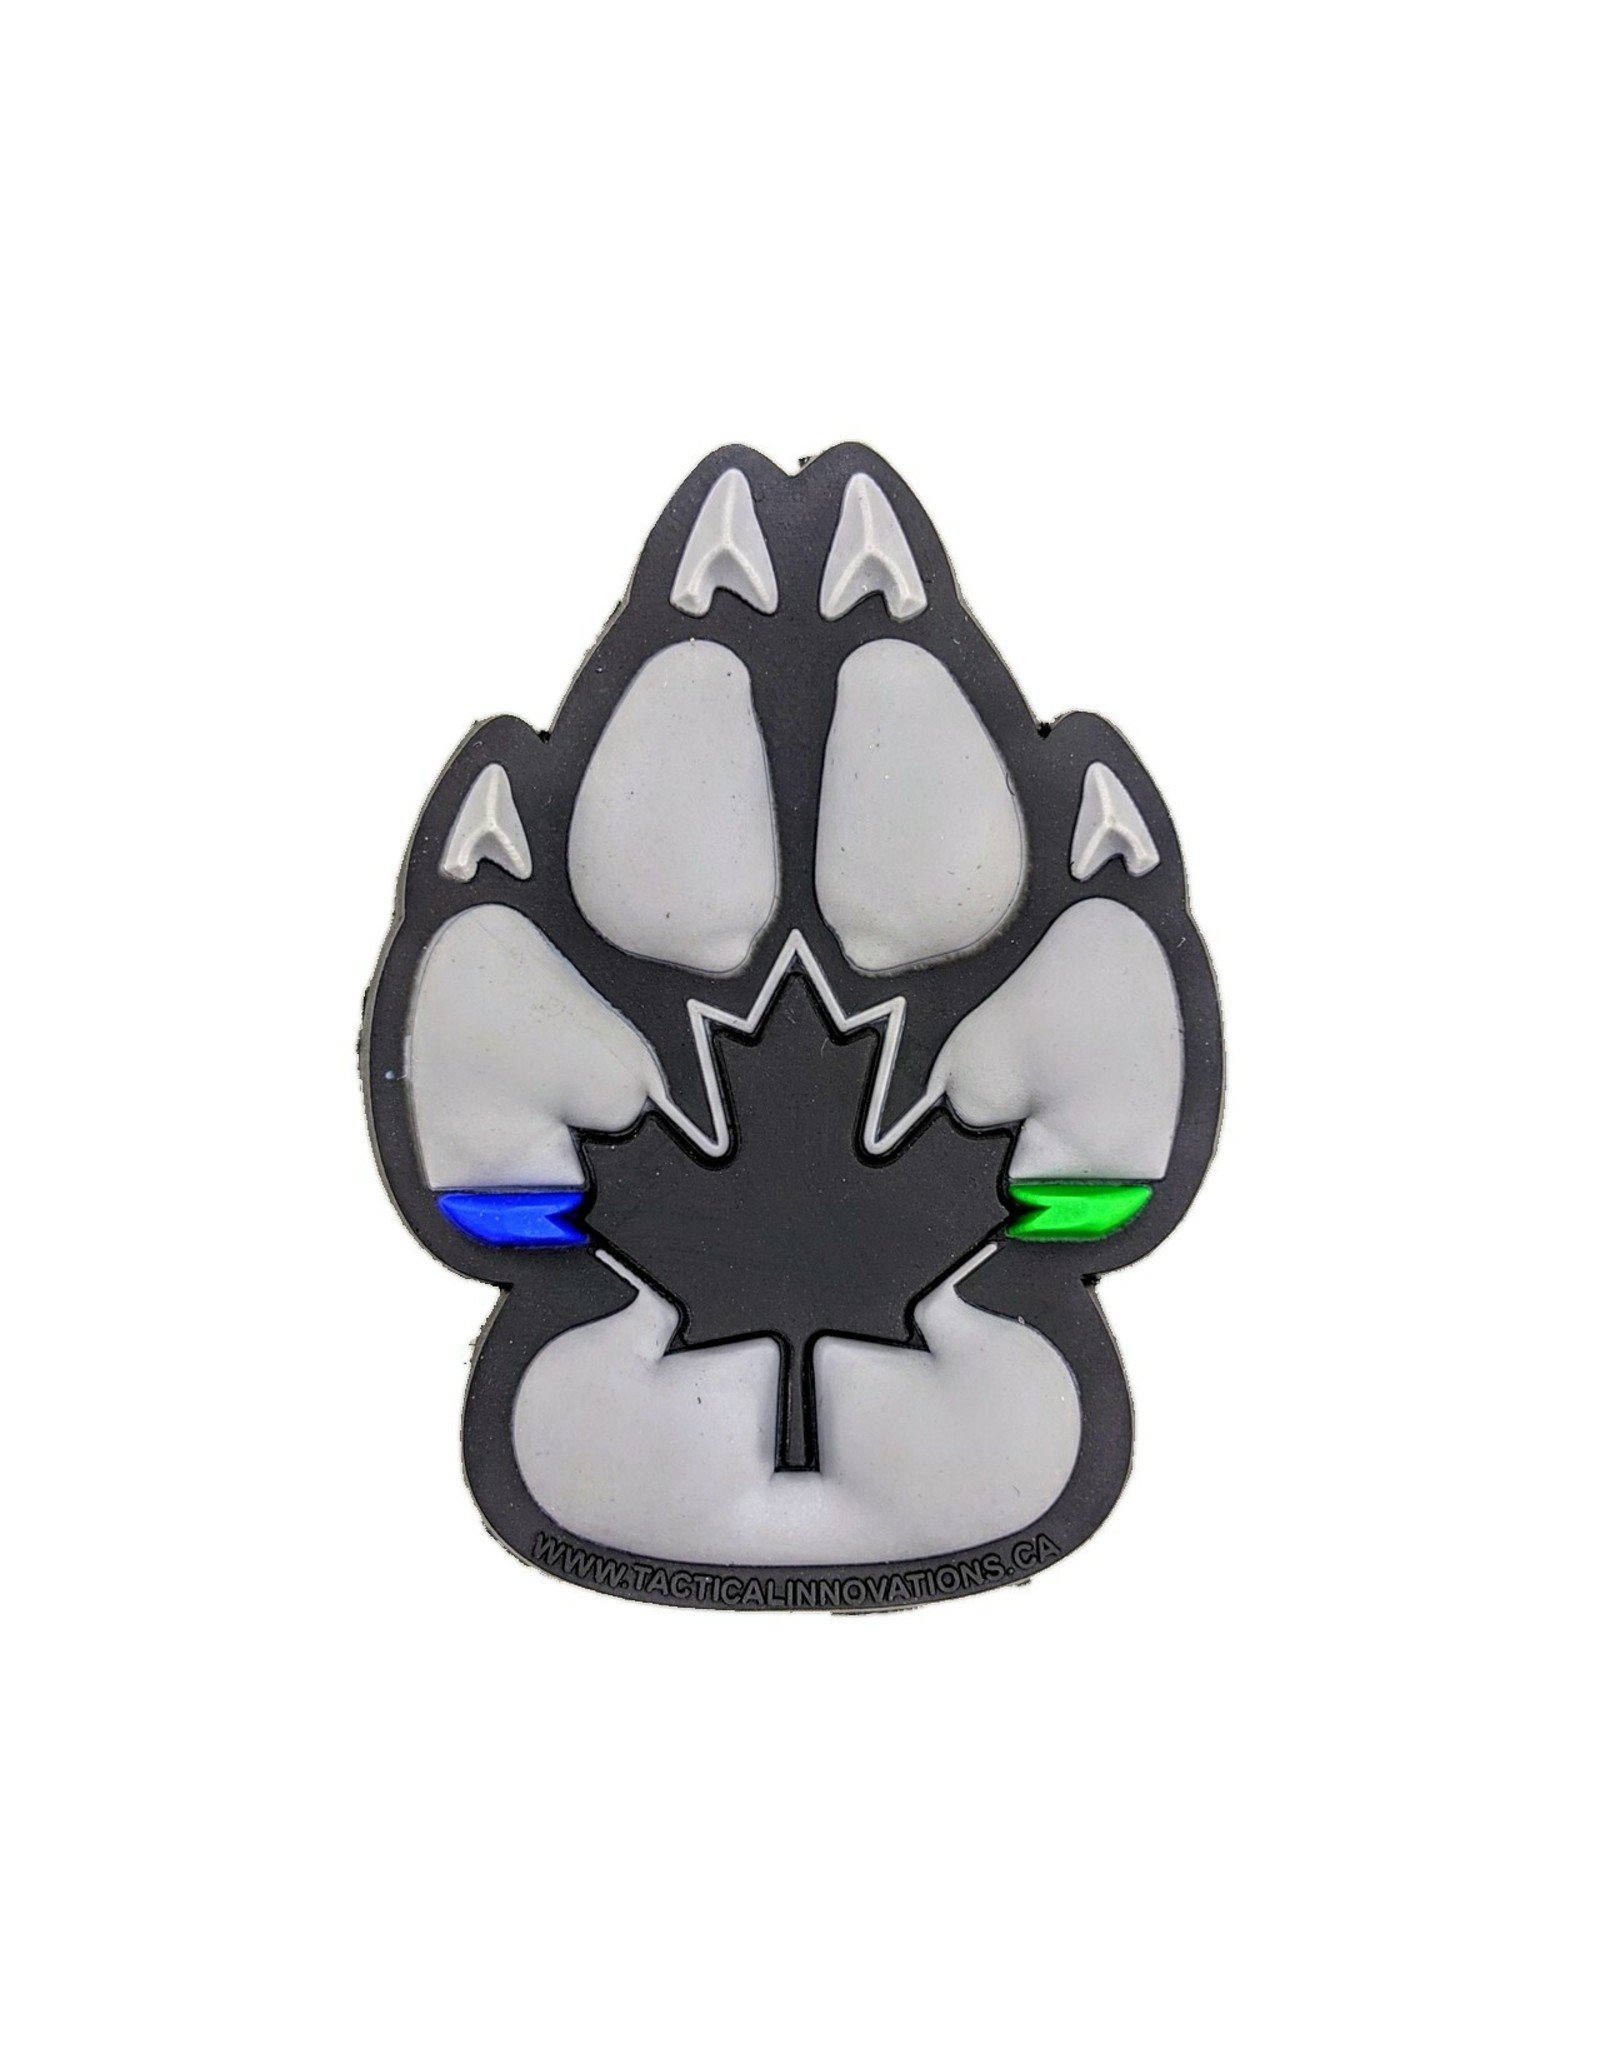 TACTICAL INNOVATIONS TIC Patch - K9 (L) THIN BLUE LINE/GREEN LINE GREY